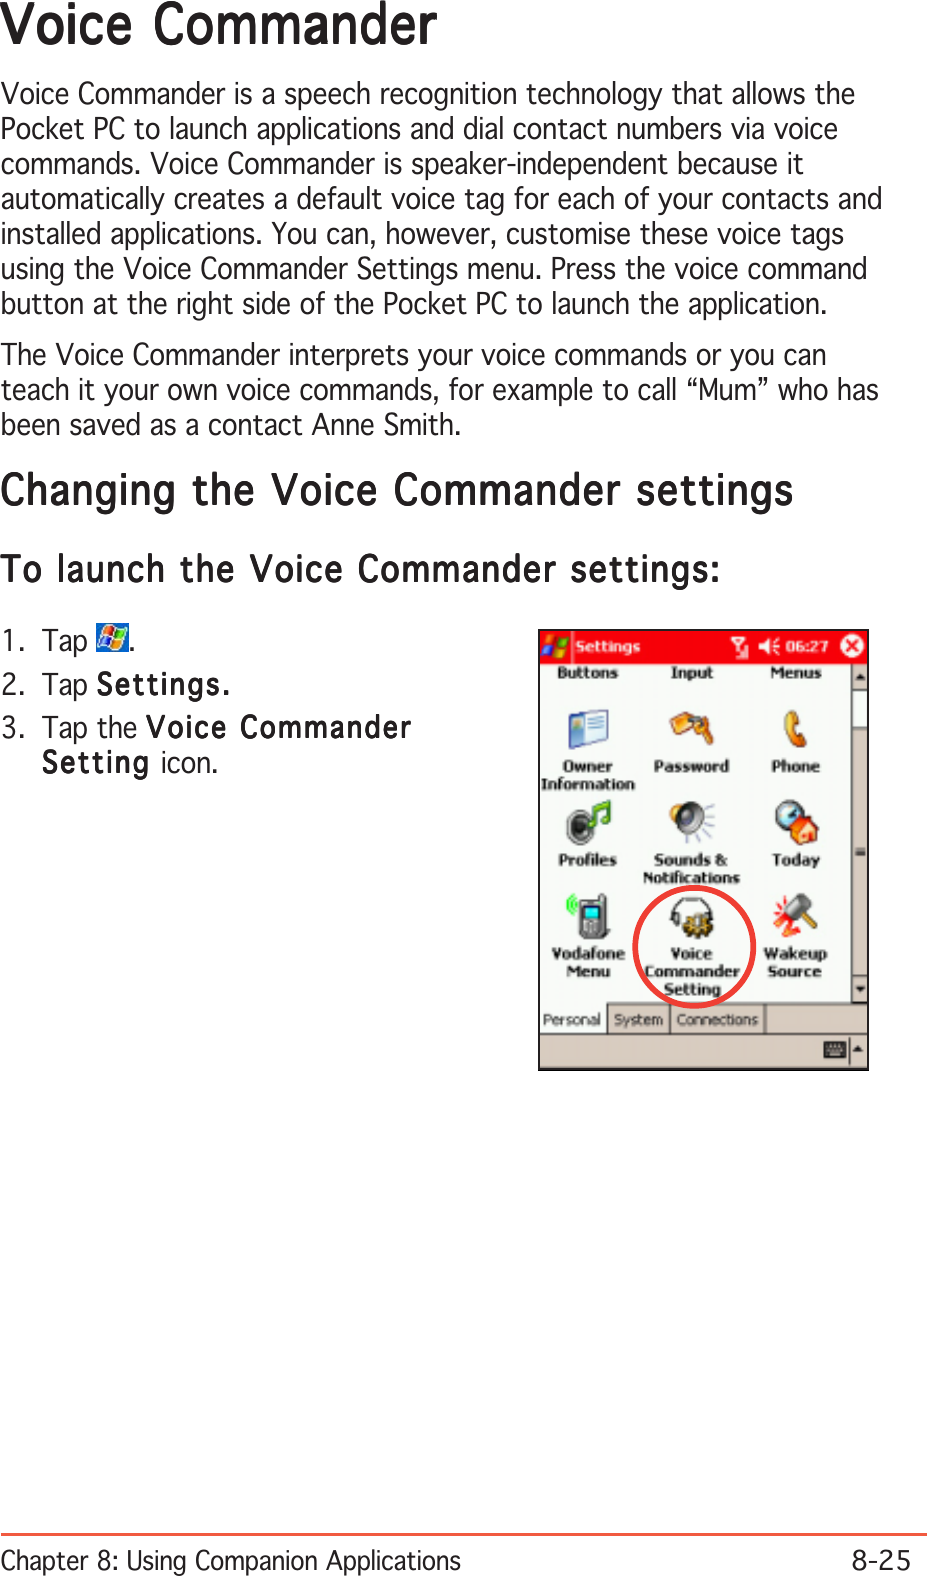 Chapter 8: Using Companion Applications8-25Voice CommanderVoice CommanderVoice CommanderVoice CommanderVoice CommanderVoice Commander is a speech recognition technology that allows thePocket PC to launch applications and dial contact numbers via voicecommands. Voice Commander is speaker-independent because itautomatically creates a default voice tag for each of your contacts andinstalled applications. You can, however, customise these voice tagsusing the Voice Commander Settings menu. Press the voice commandbutton at the right side of the Pocket PC to launch the application.The Voice Commander interprets your voice commands or you canteach it your own voice commands, for example to call “Mum” who hasbeen saved as a contact Anne Smith.Changing the Voice Commander settingsChanging the Voice Commander settingsChanging the Voice Commander settingsChanging the Voice Commander settingsChanging the Voice Commander settingsTo launch the Voice Commander settings:To launch the Voice Commander settings:To launch the Voice Commander settings:To launch the Voice Commander settings:To launch the Voice Commander settings:1. Tap  .2. Tap Settings.Settings.Settings.Settings.Settings.3. Tap the Voice CommanderVoice CommanderVoice CommanderVoice CommanderVoice CommanderSettingSettingSettingSettingSetting icon.